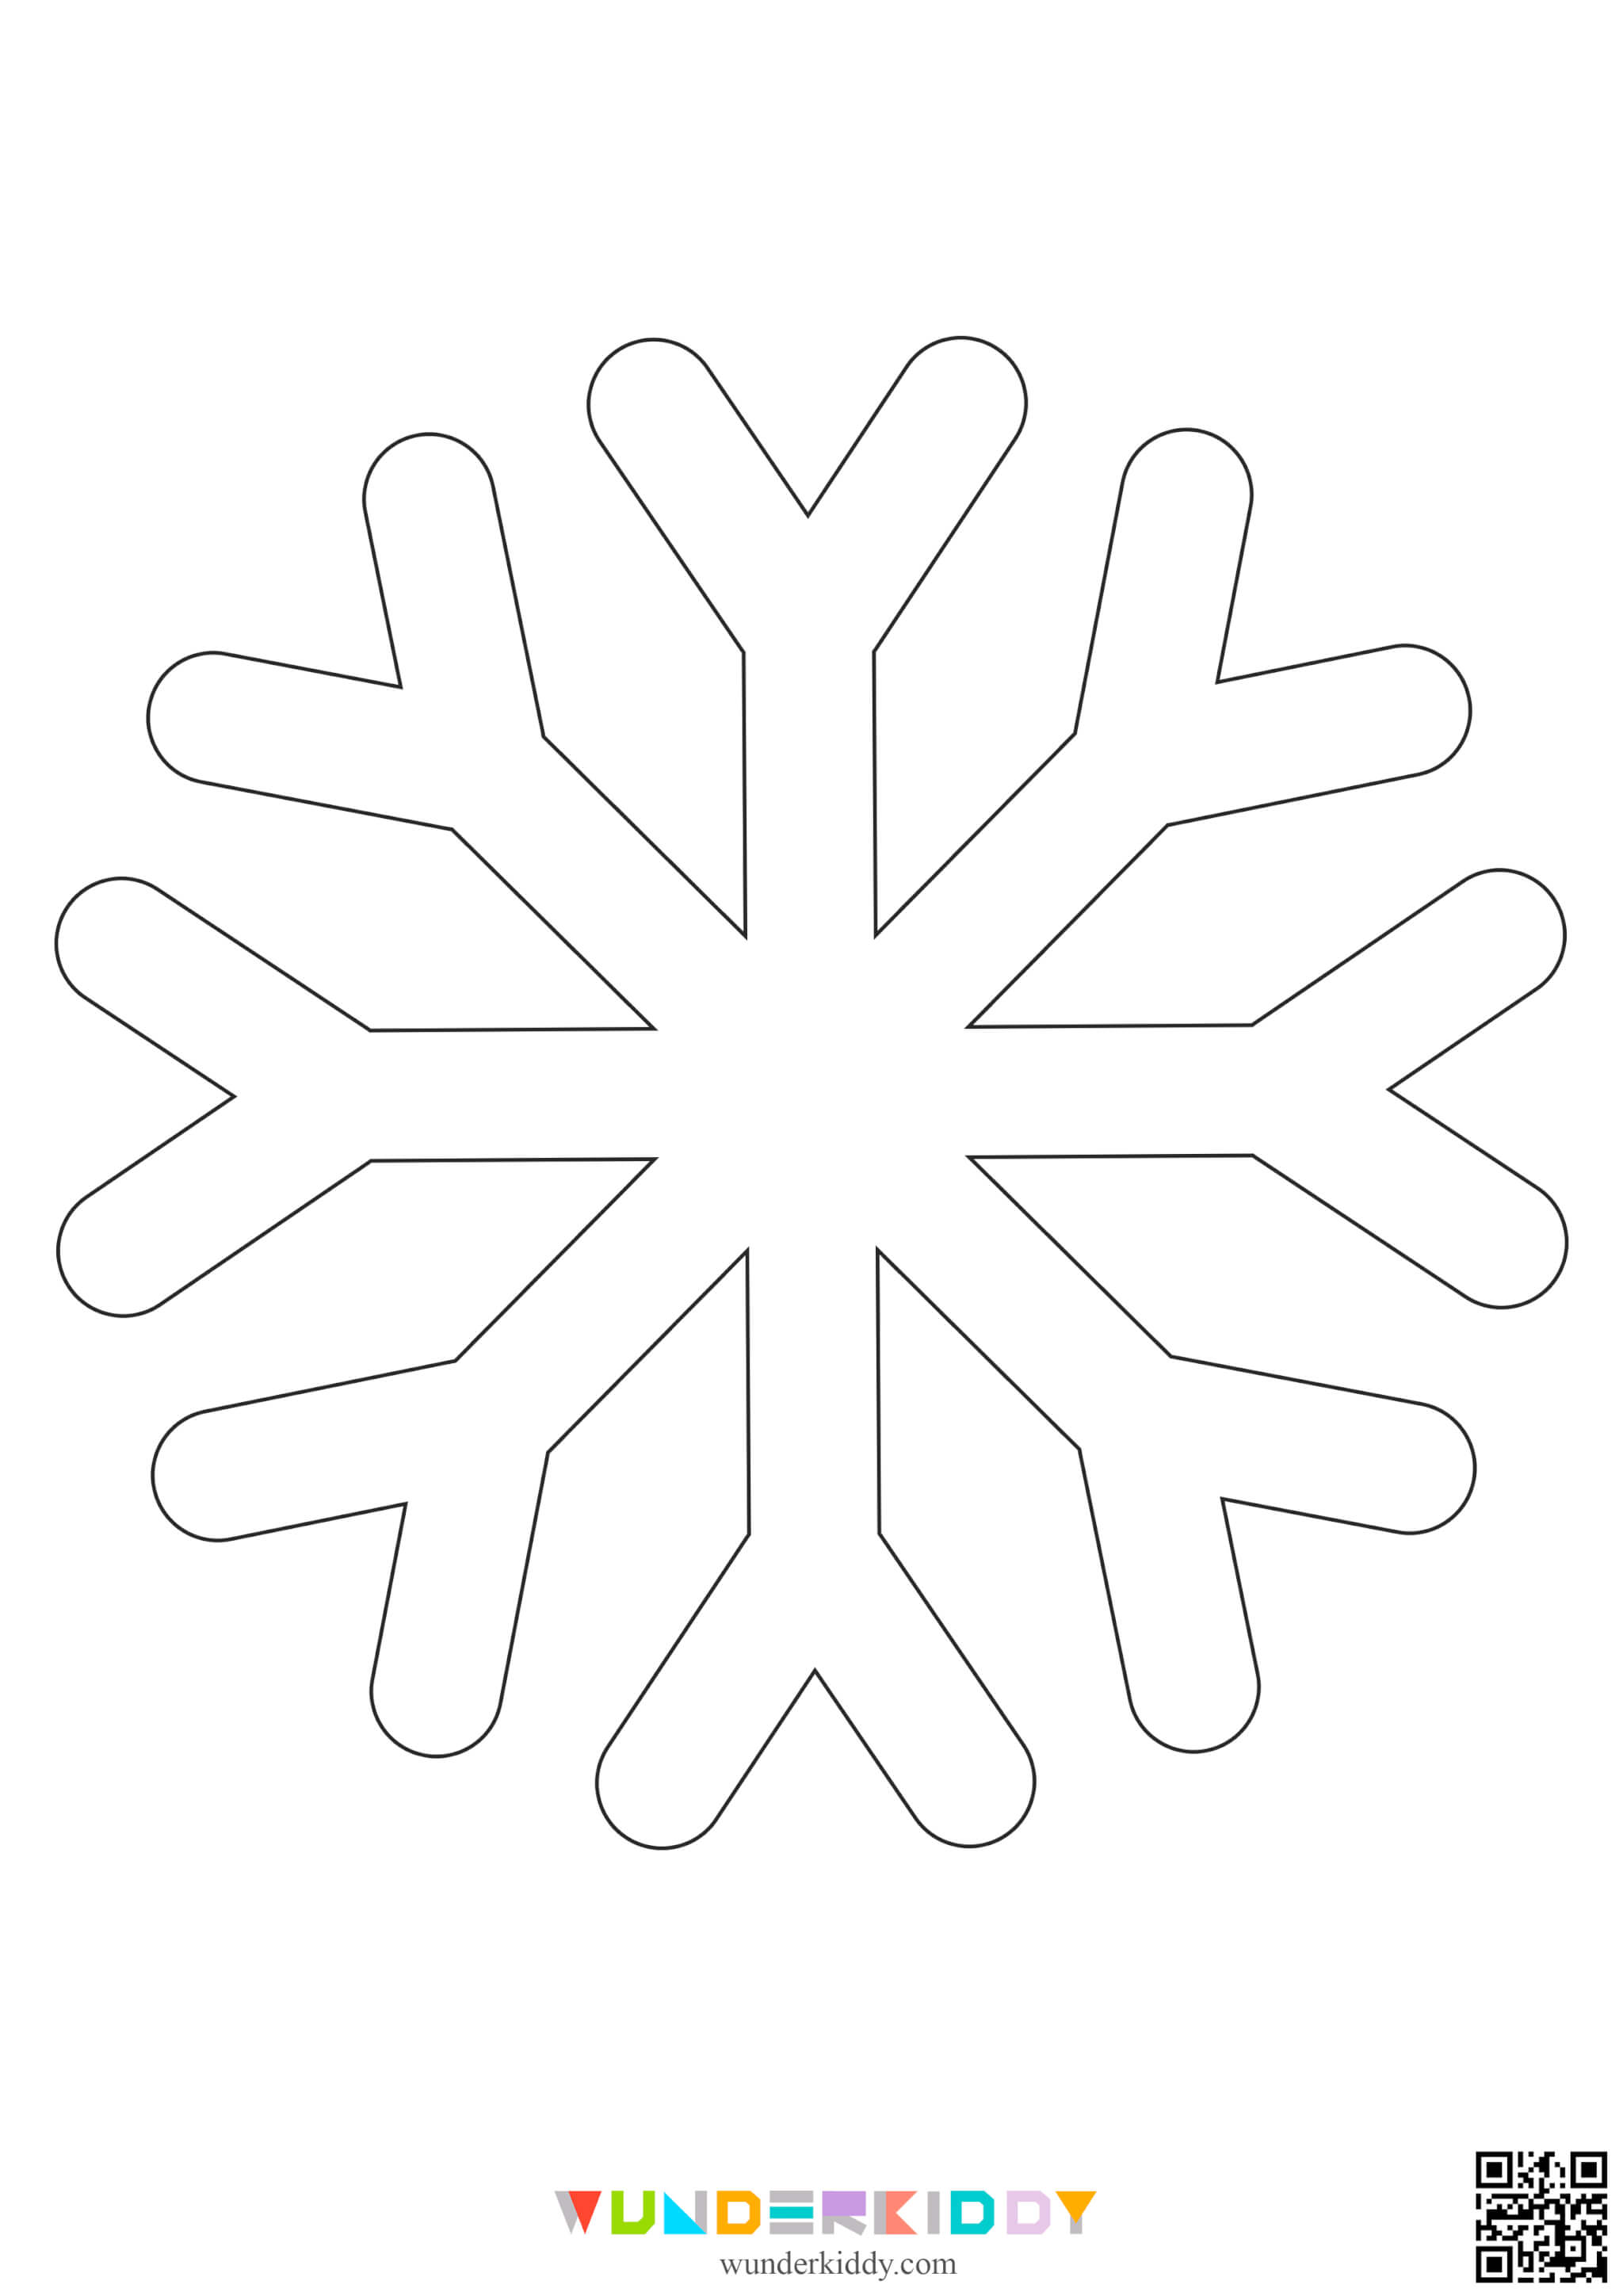 Snowflakes Template - Image 3